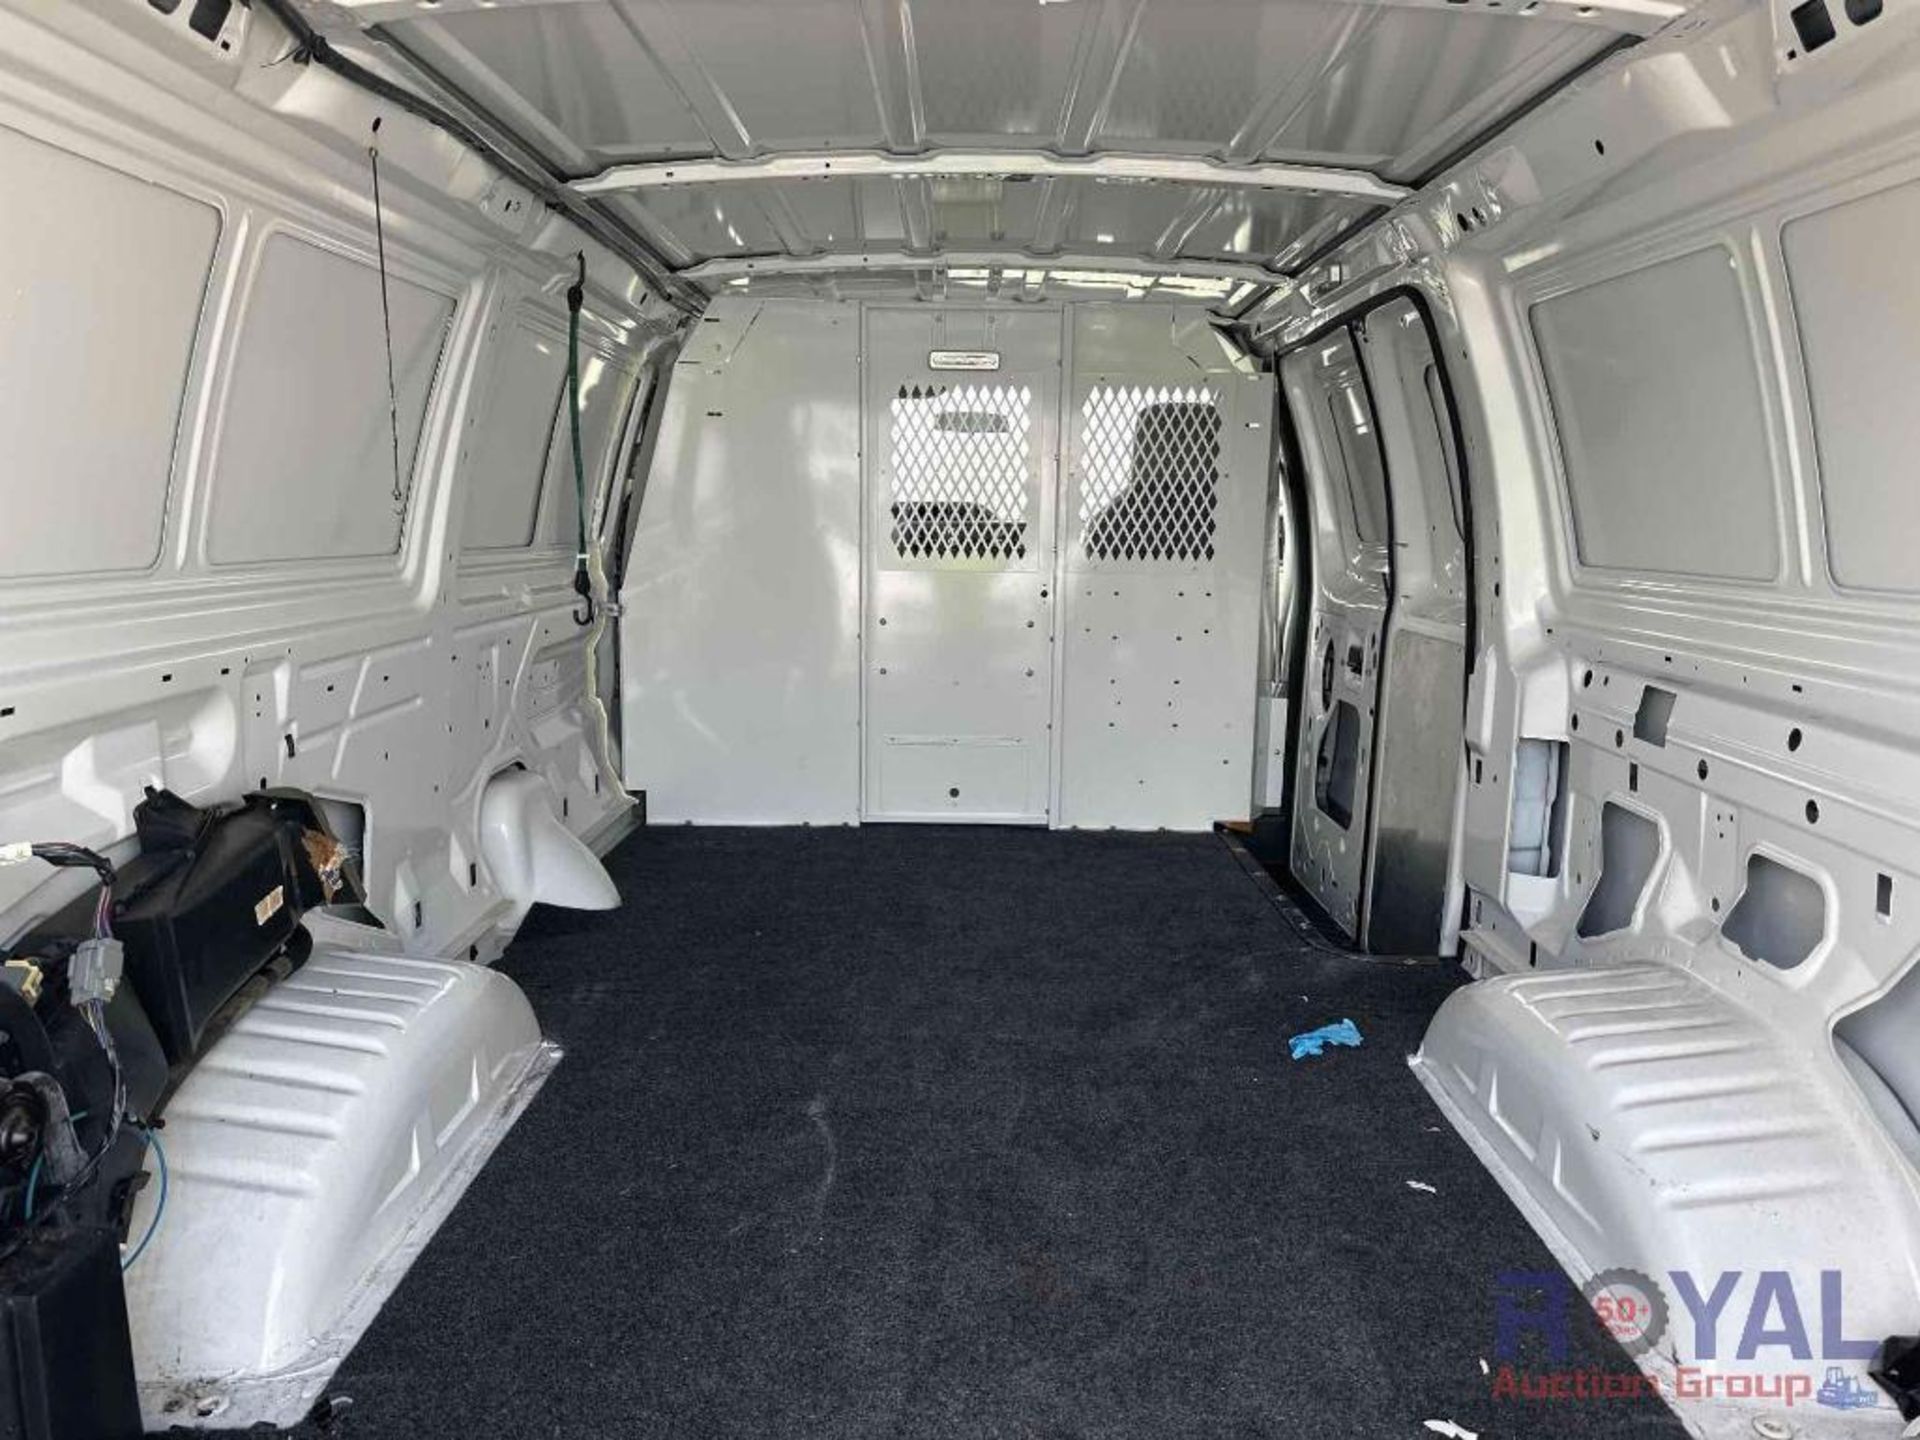 2011 Ford E350 Cargo Van - Image 20 of 27